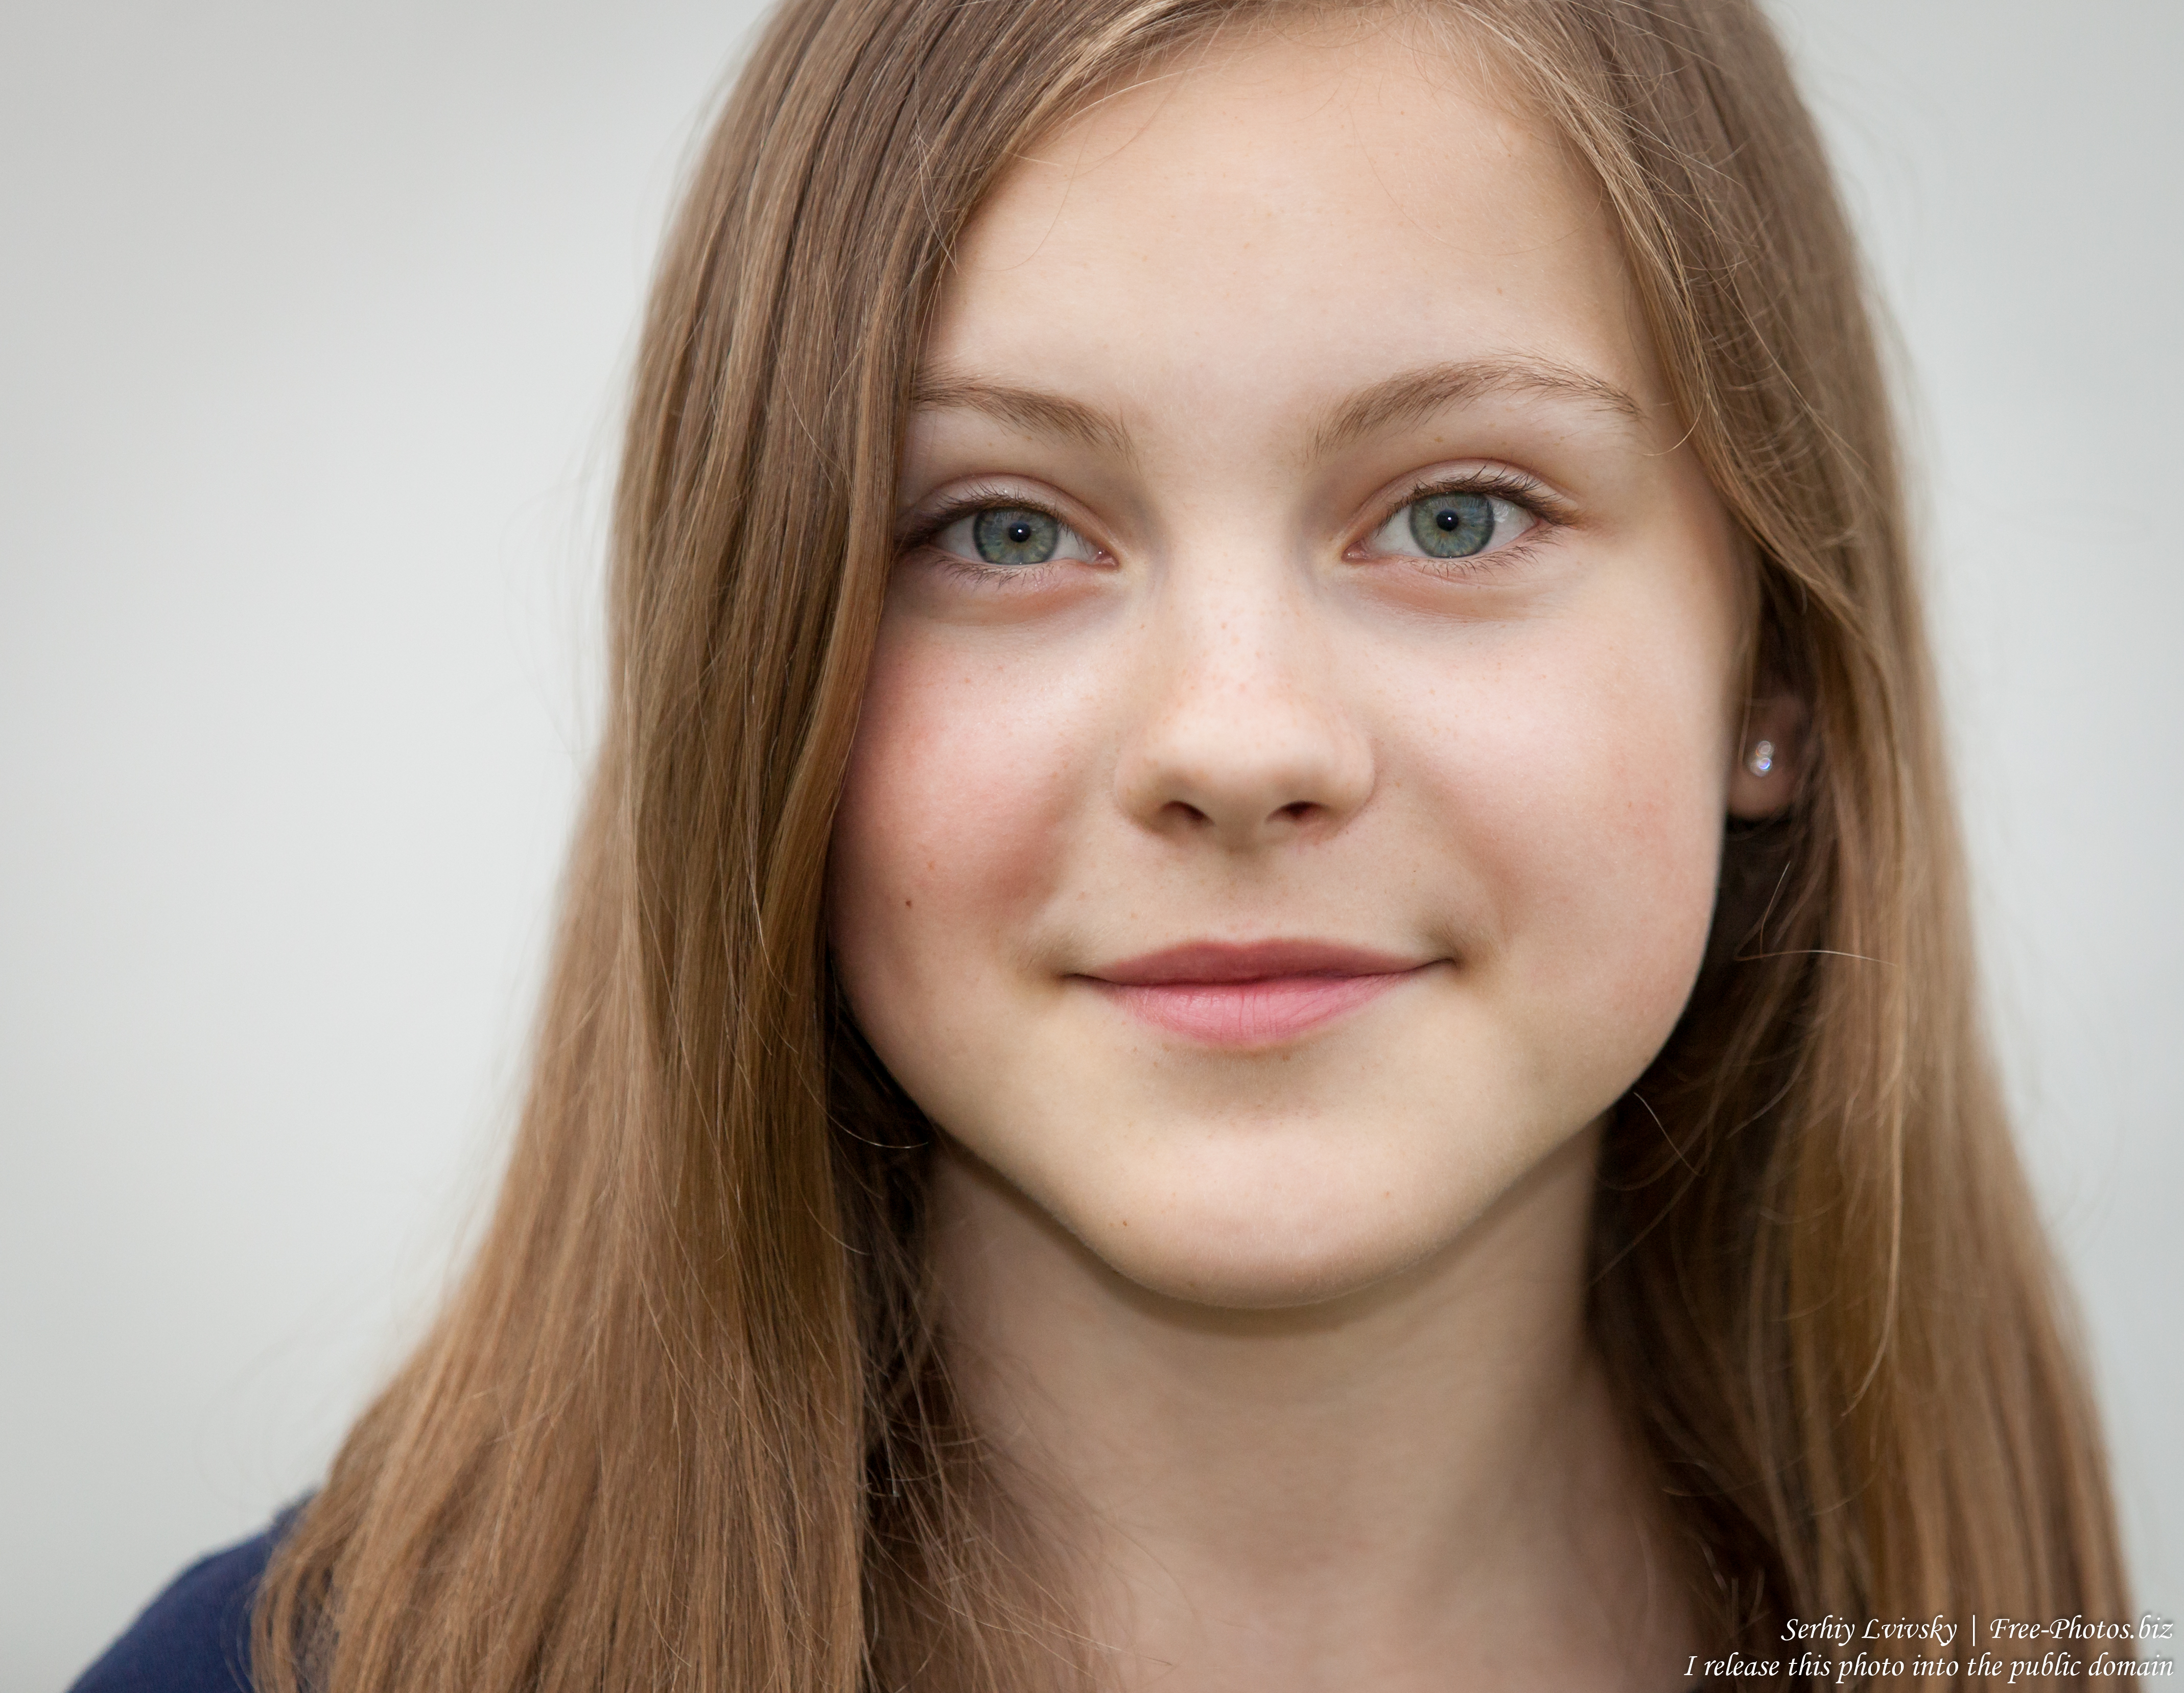 a 13 year old Roman-Catholic girl photographed in July 2015, picture 1